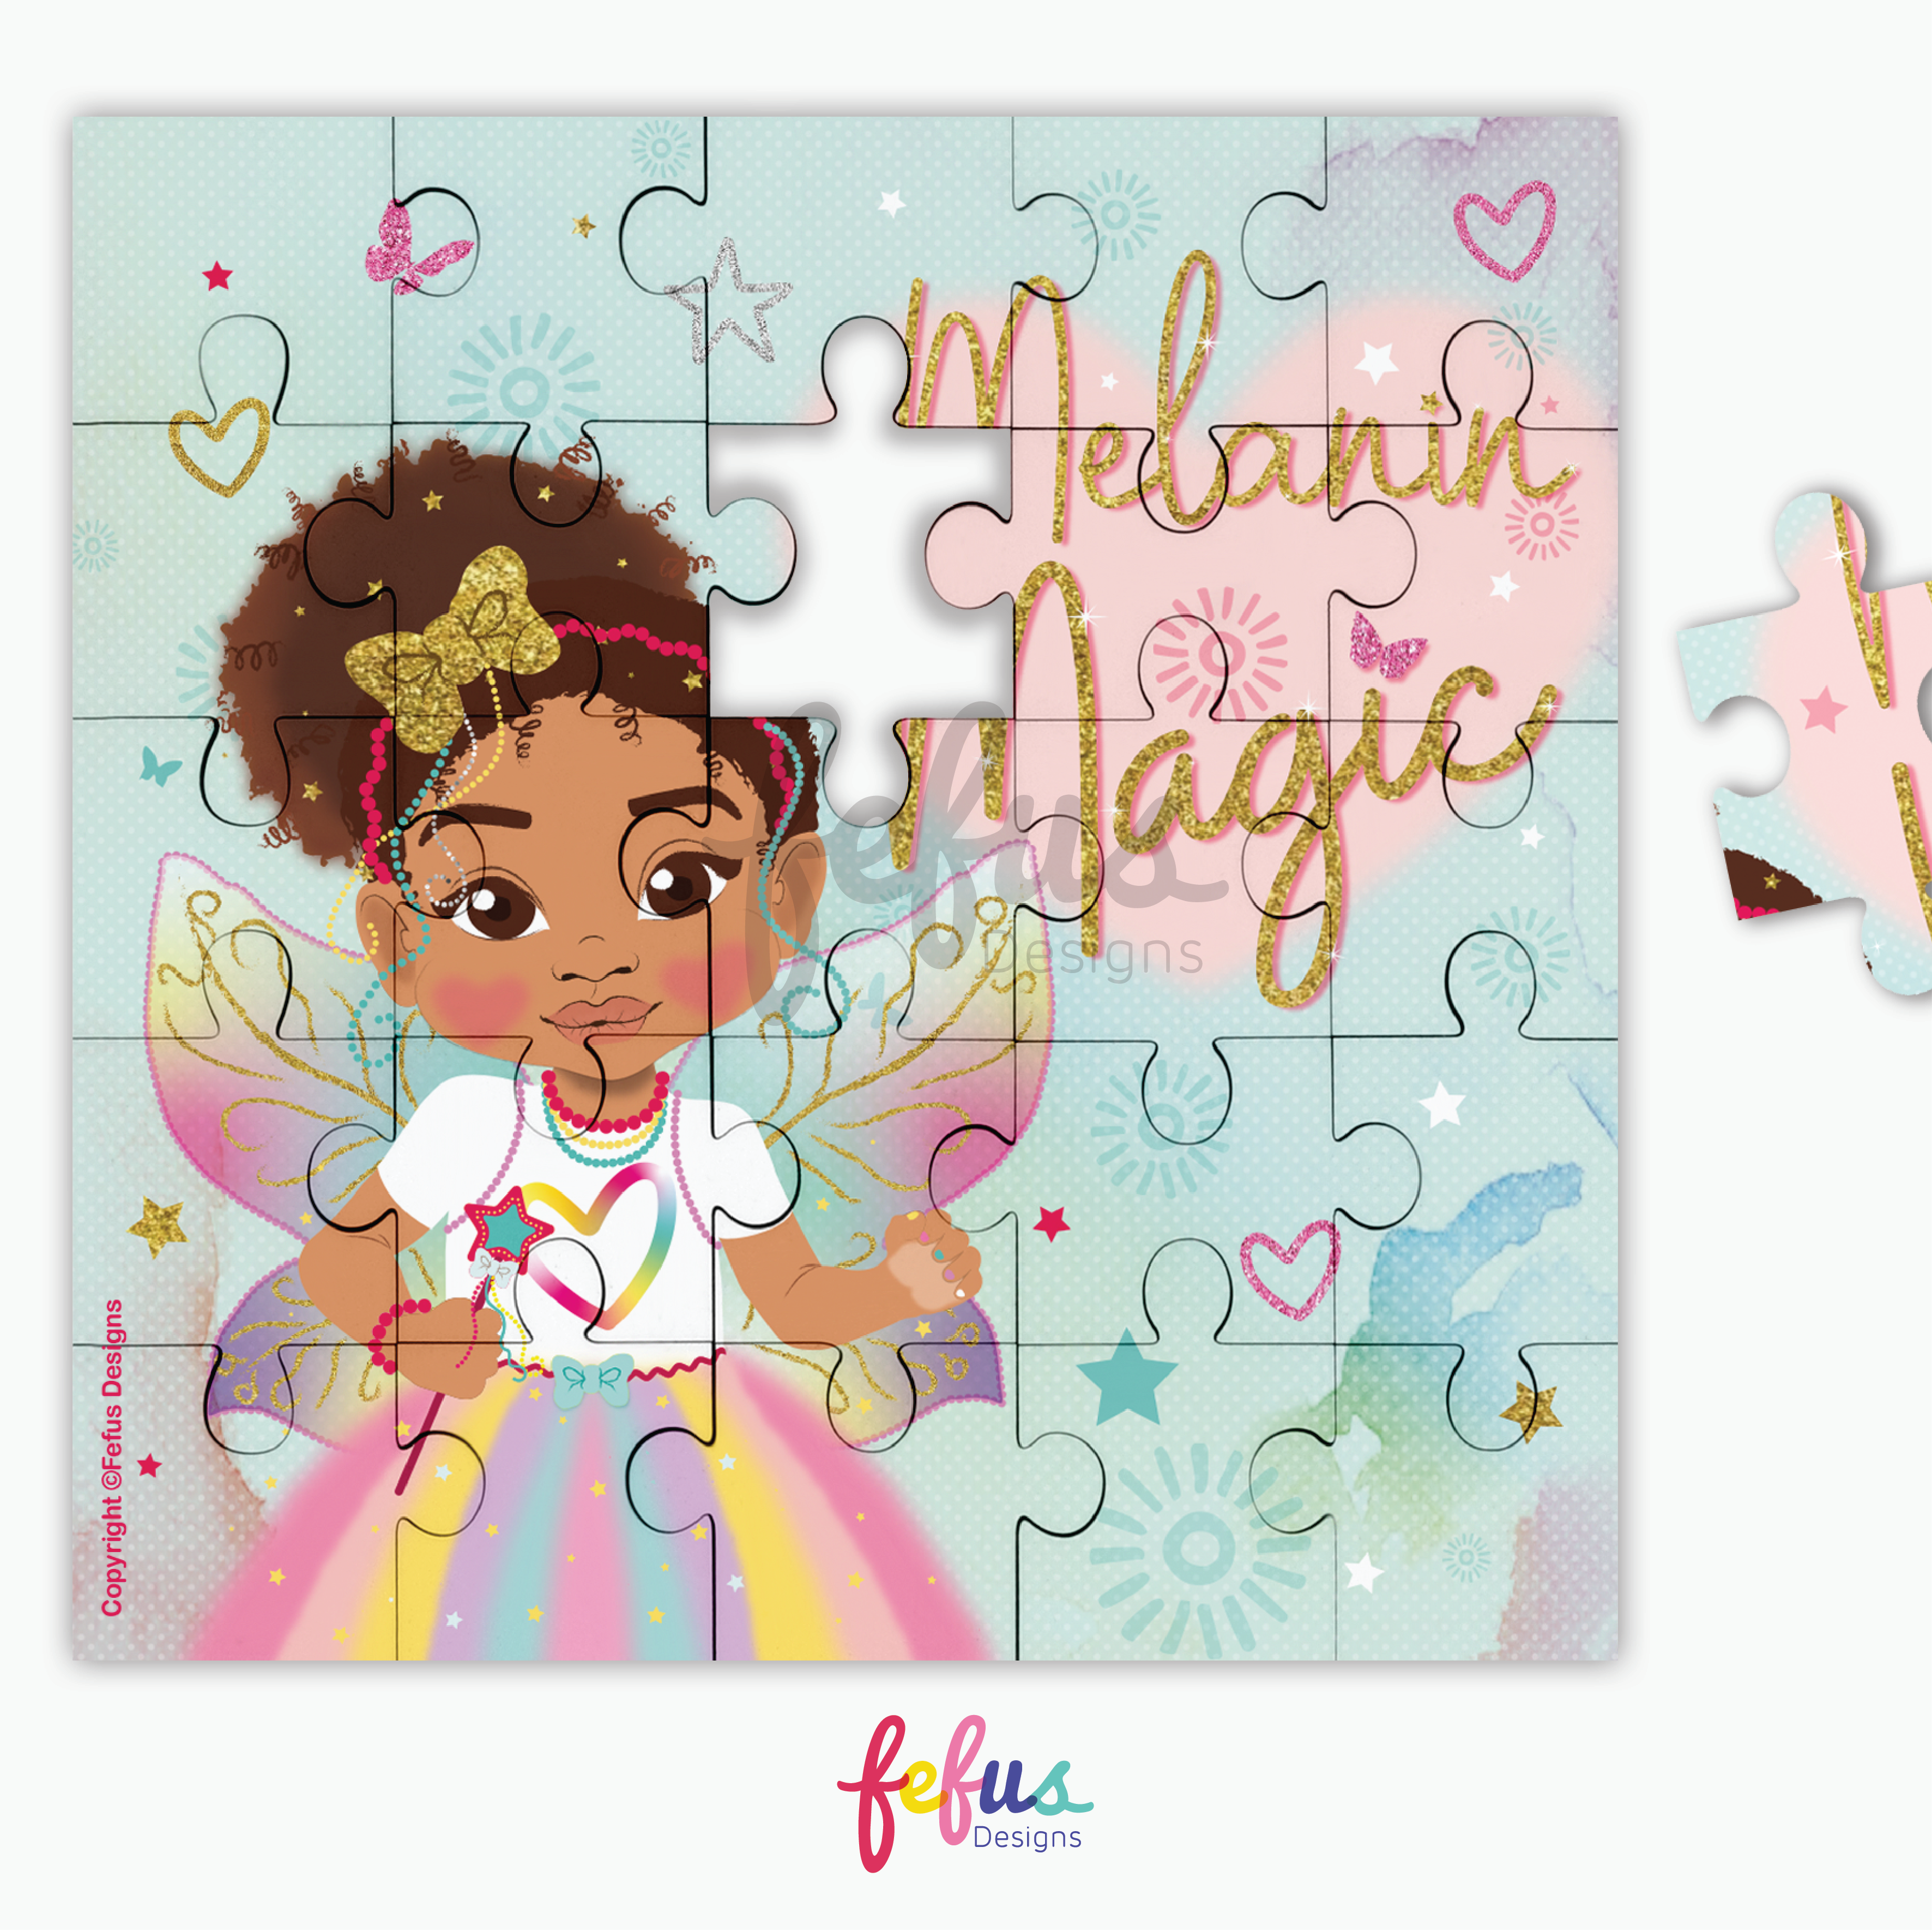 Mixed girl magic Jigsaw Square Puzzle - Premium quality wooden Jigsaw Square Puzzle - 25pcs